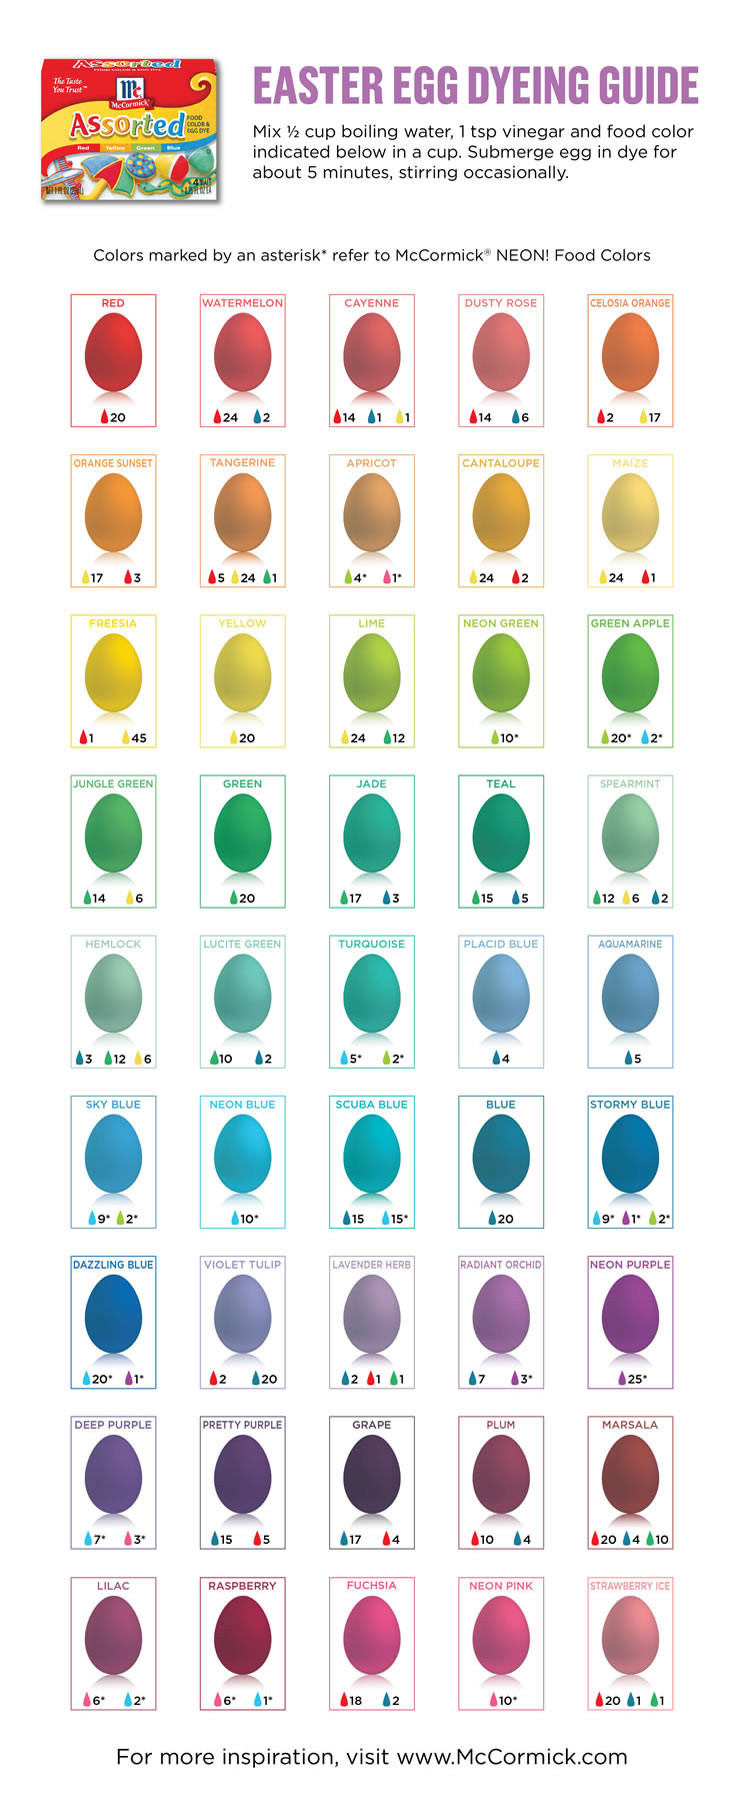 Coloring Easter Eggs With Food Coloring
 Egg Dye With Food Coloring Chart Coloring Walls